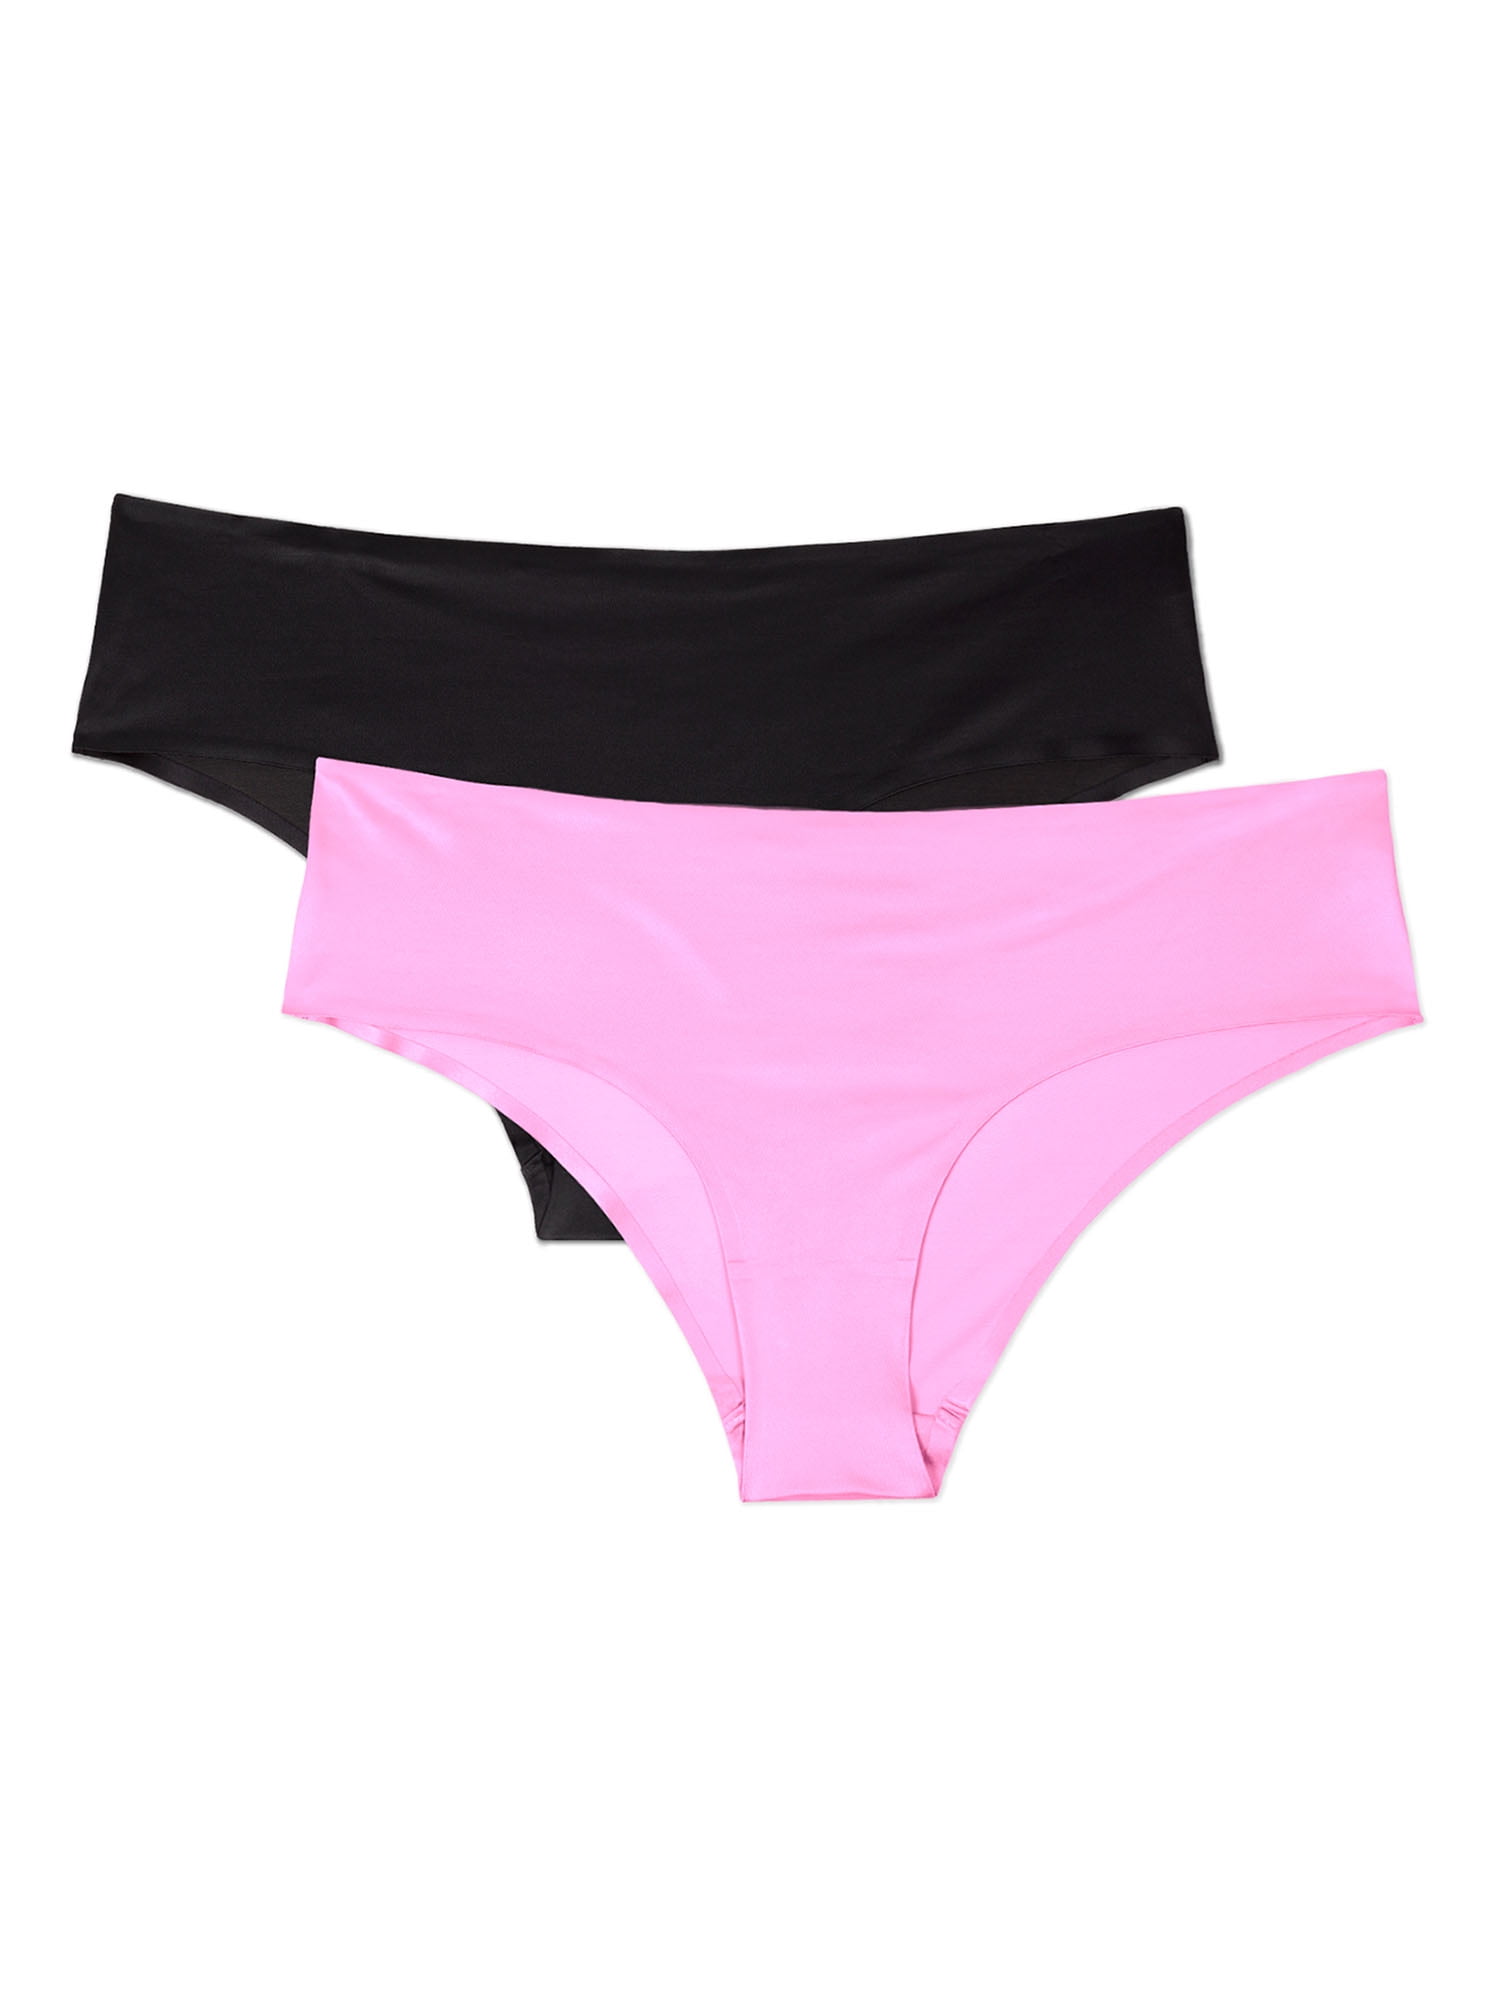 Smart & Sexy Women's No-show Hipster Panty 2 Pack